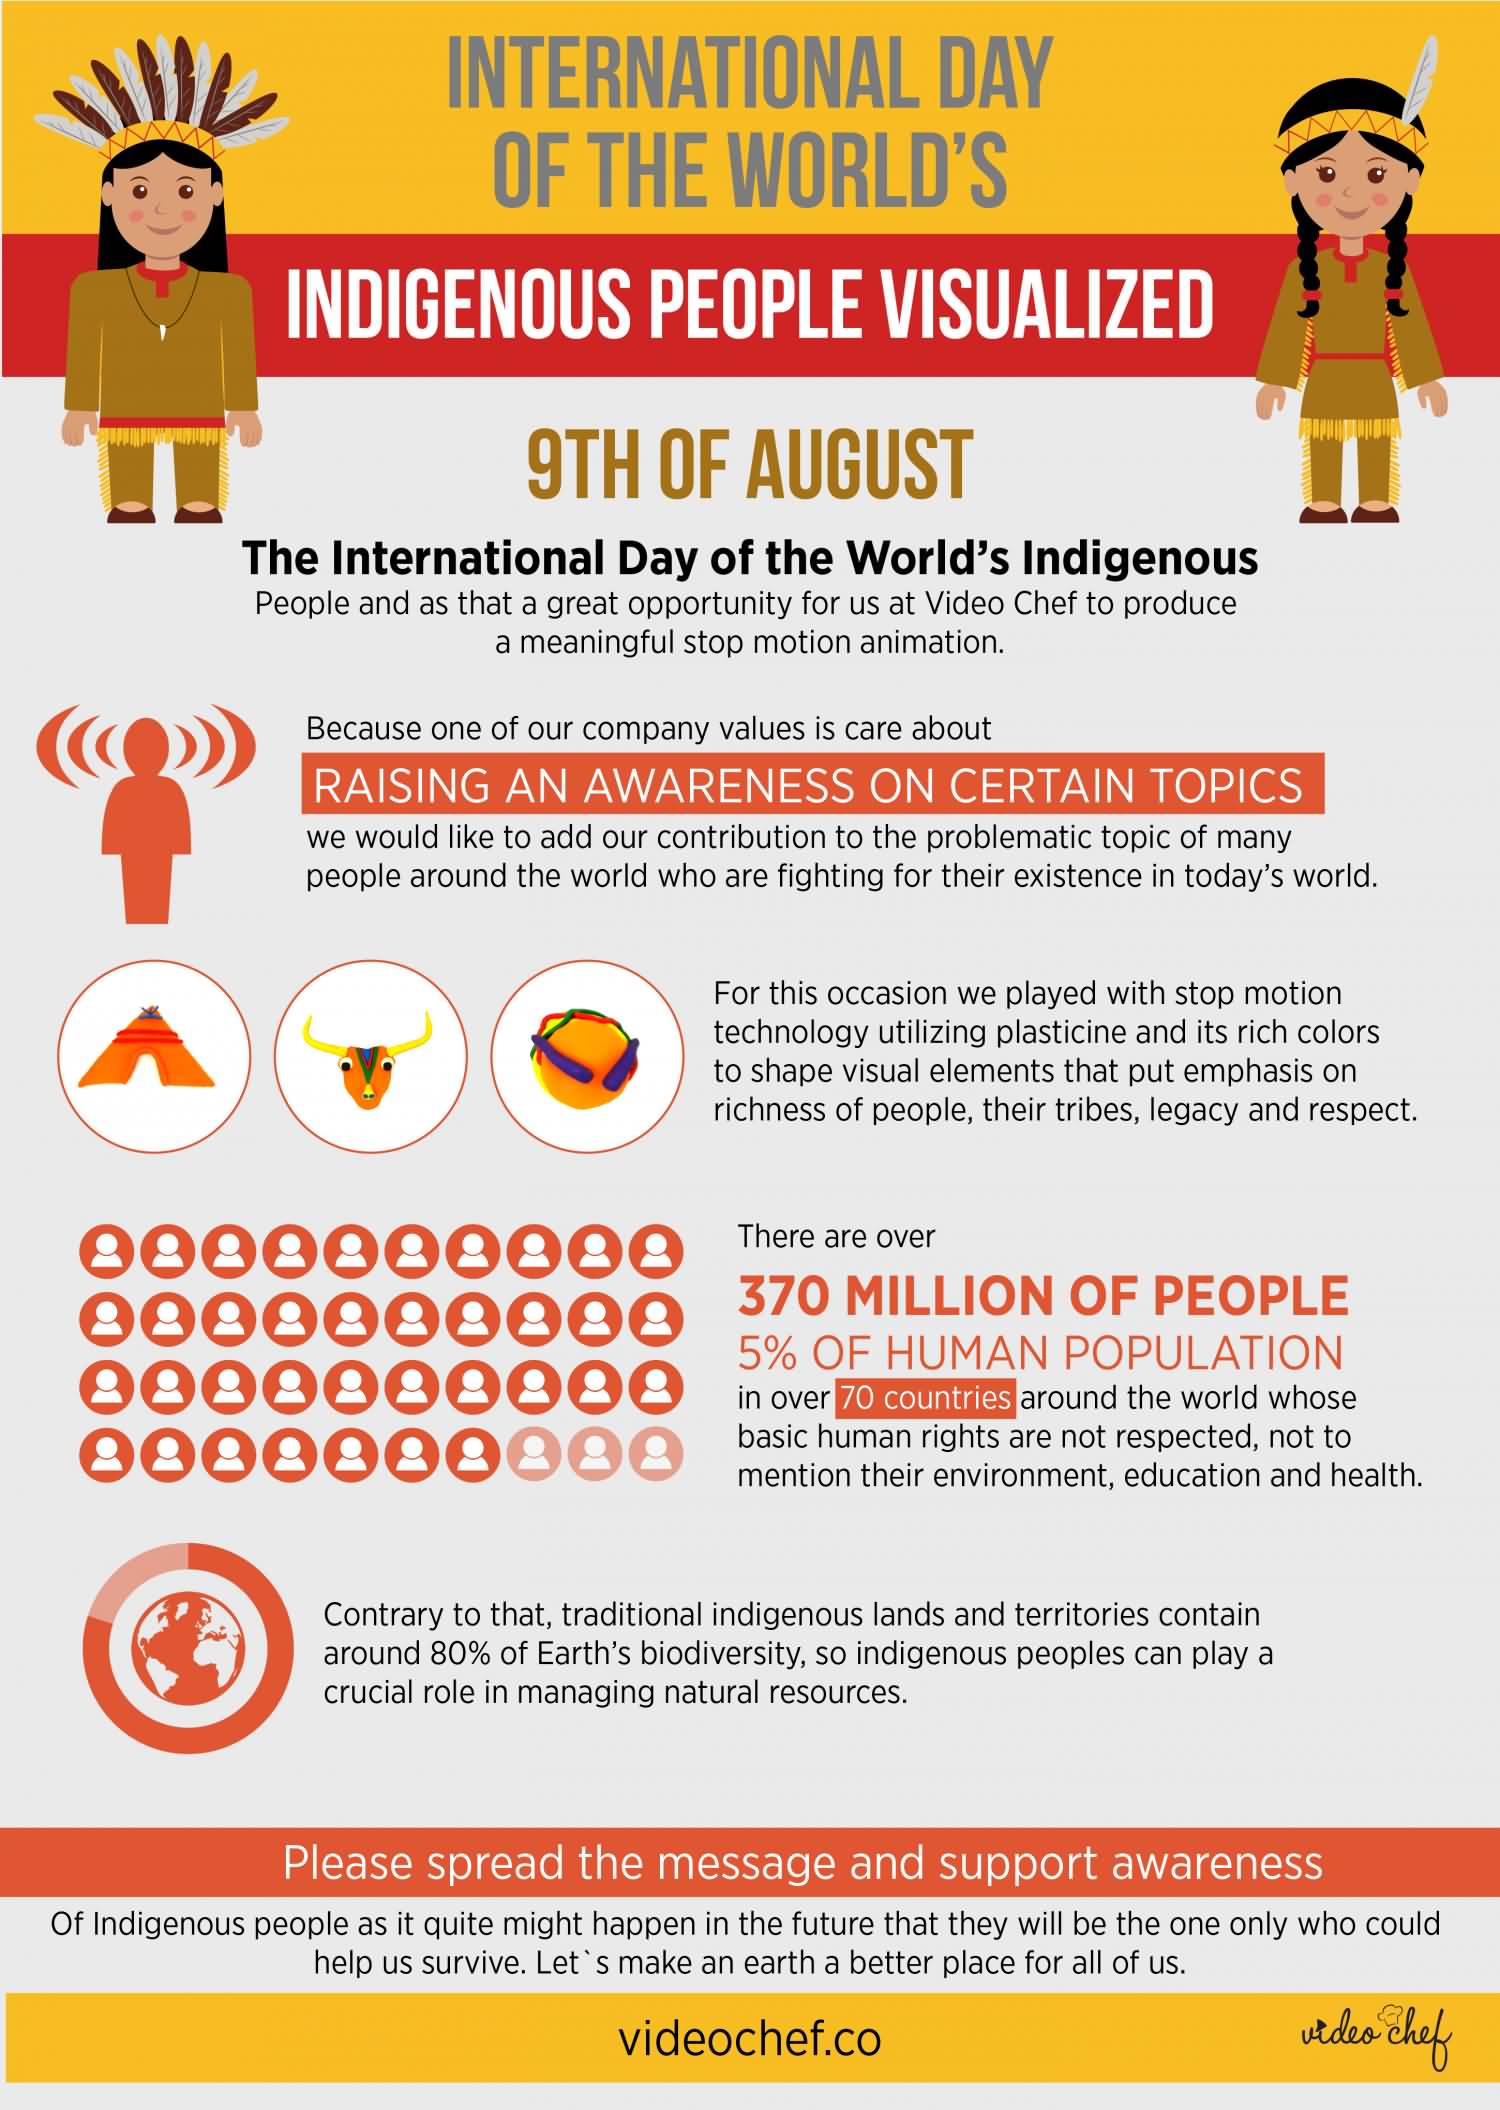 International Day Of The World's Indigenous People Visualized 9th Of August